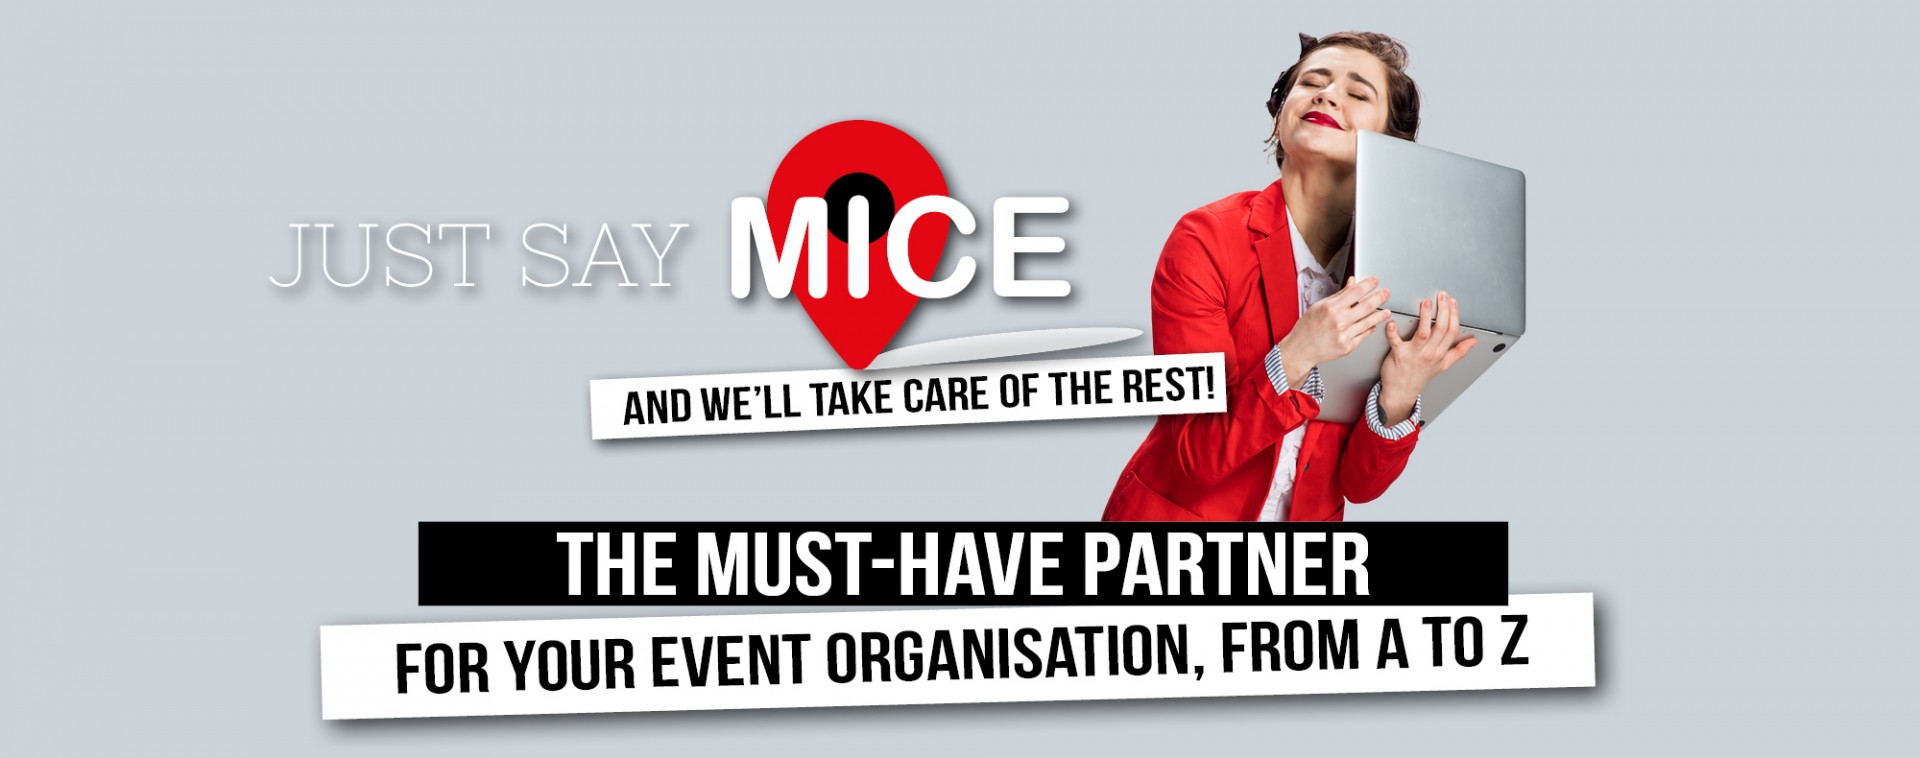 Your event from A to Z - MICE - Liège-Spa Businessland | © Getty Images